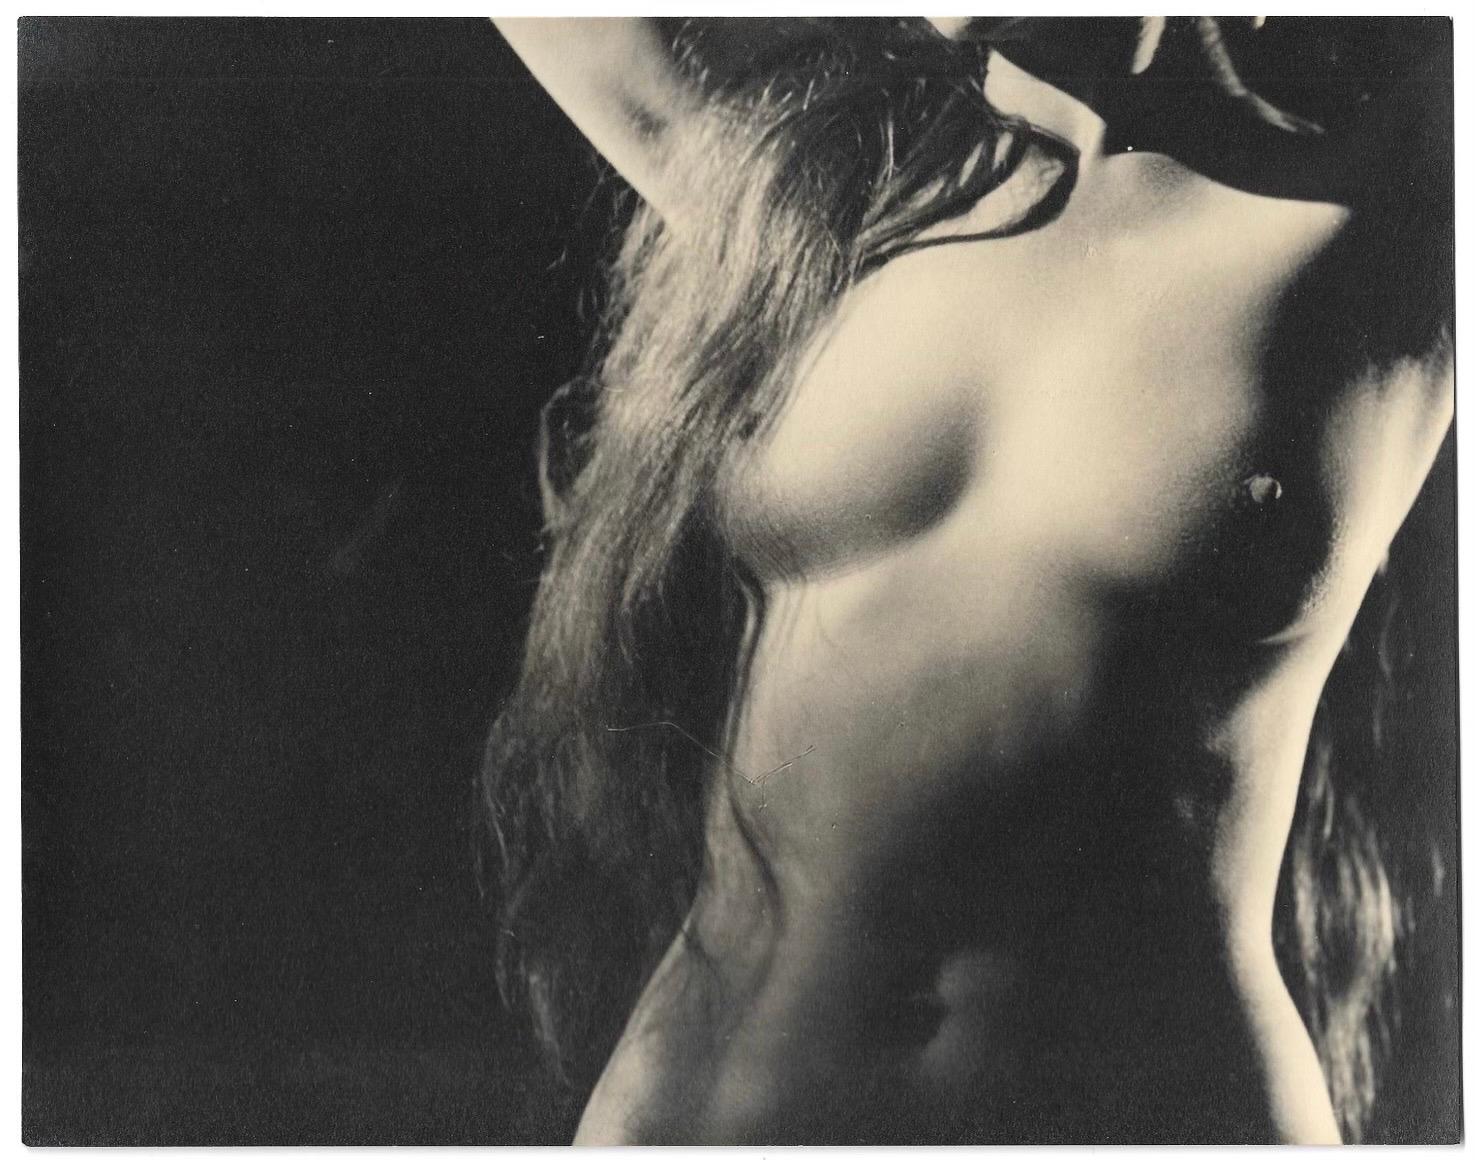 Black & White Photograph of a Female Nude by Contemporary American Photographer